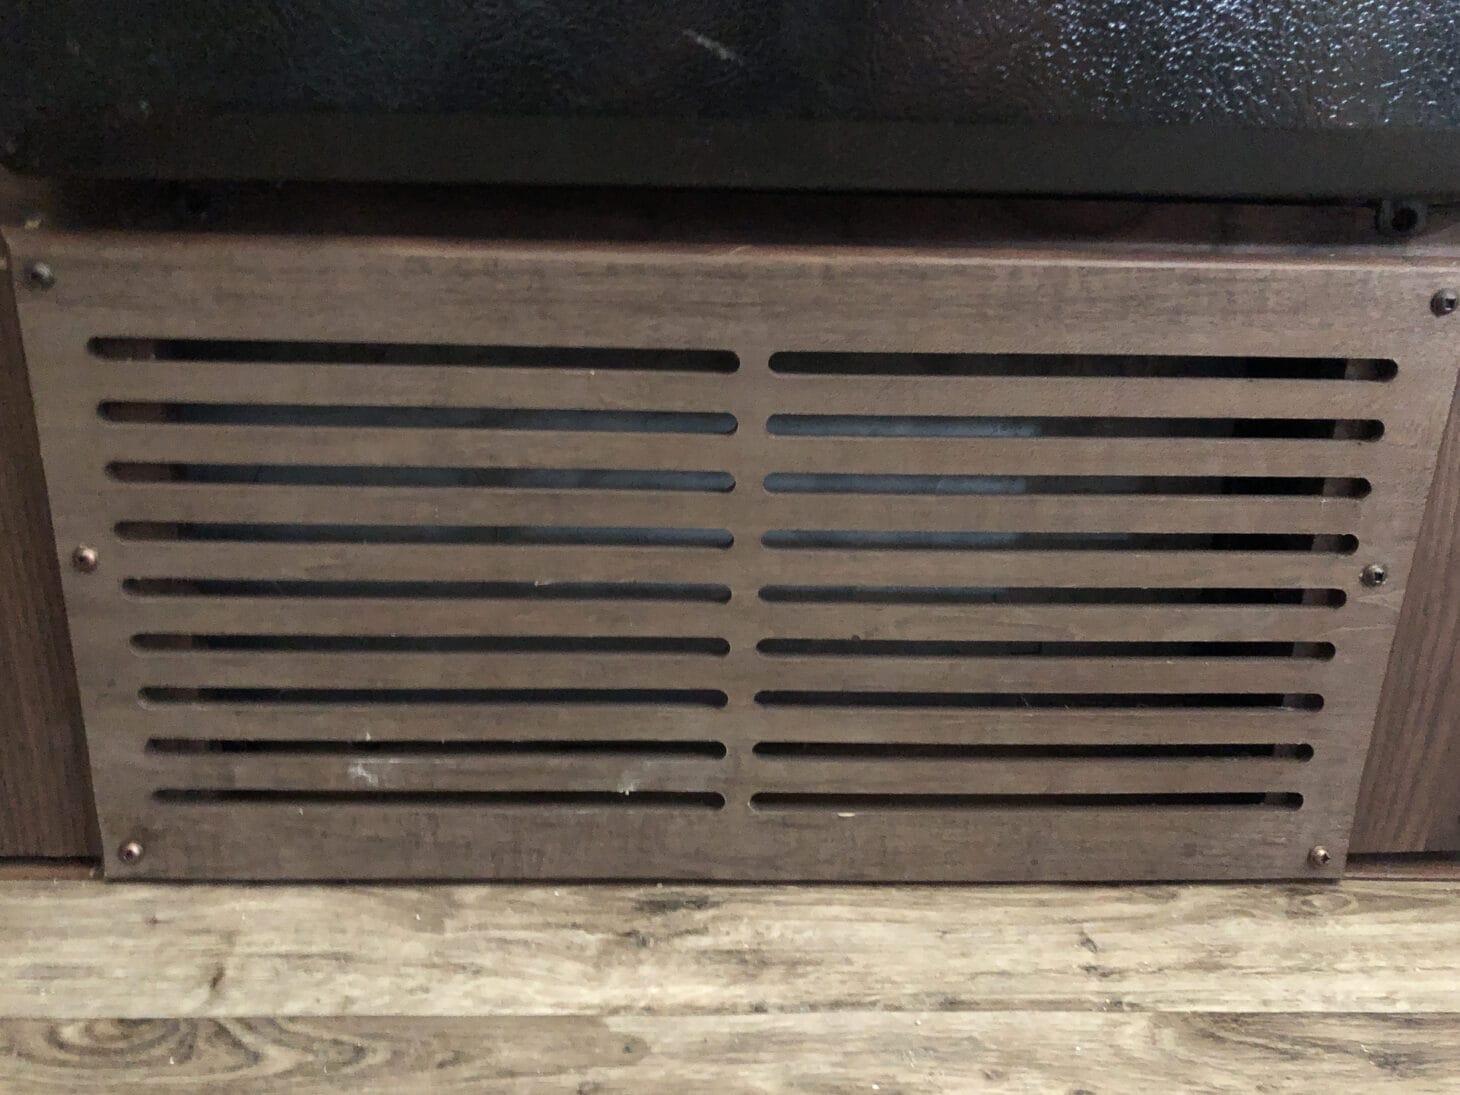 Wooden cover over a furnace return vent under bench seating in an RV